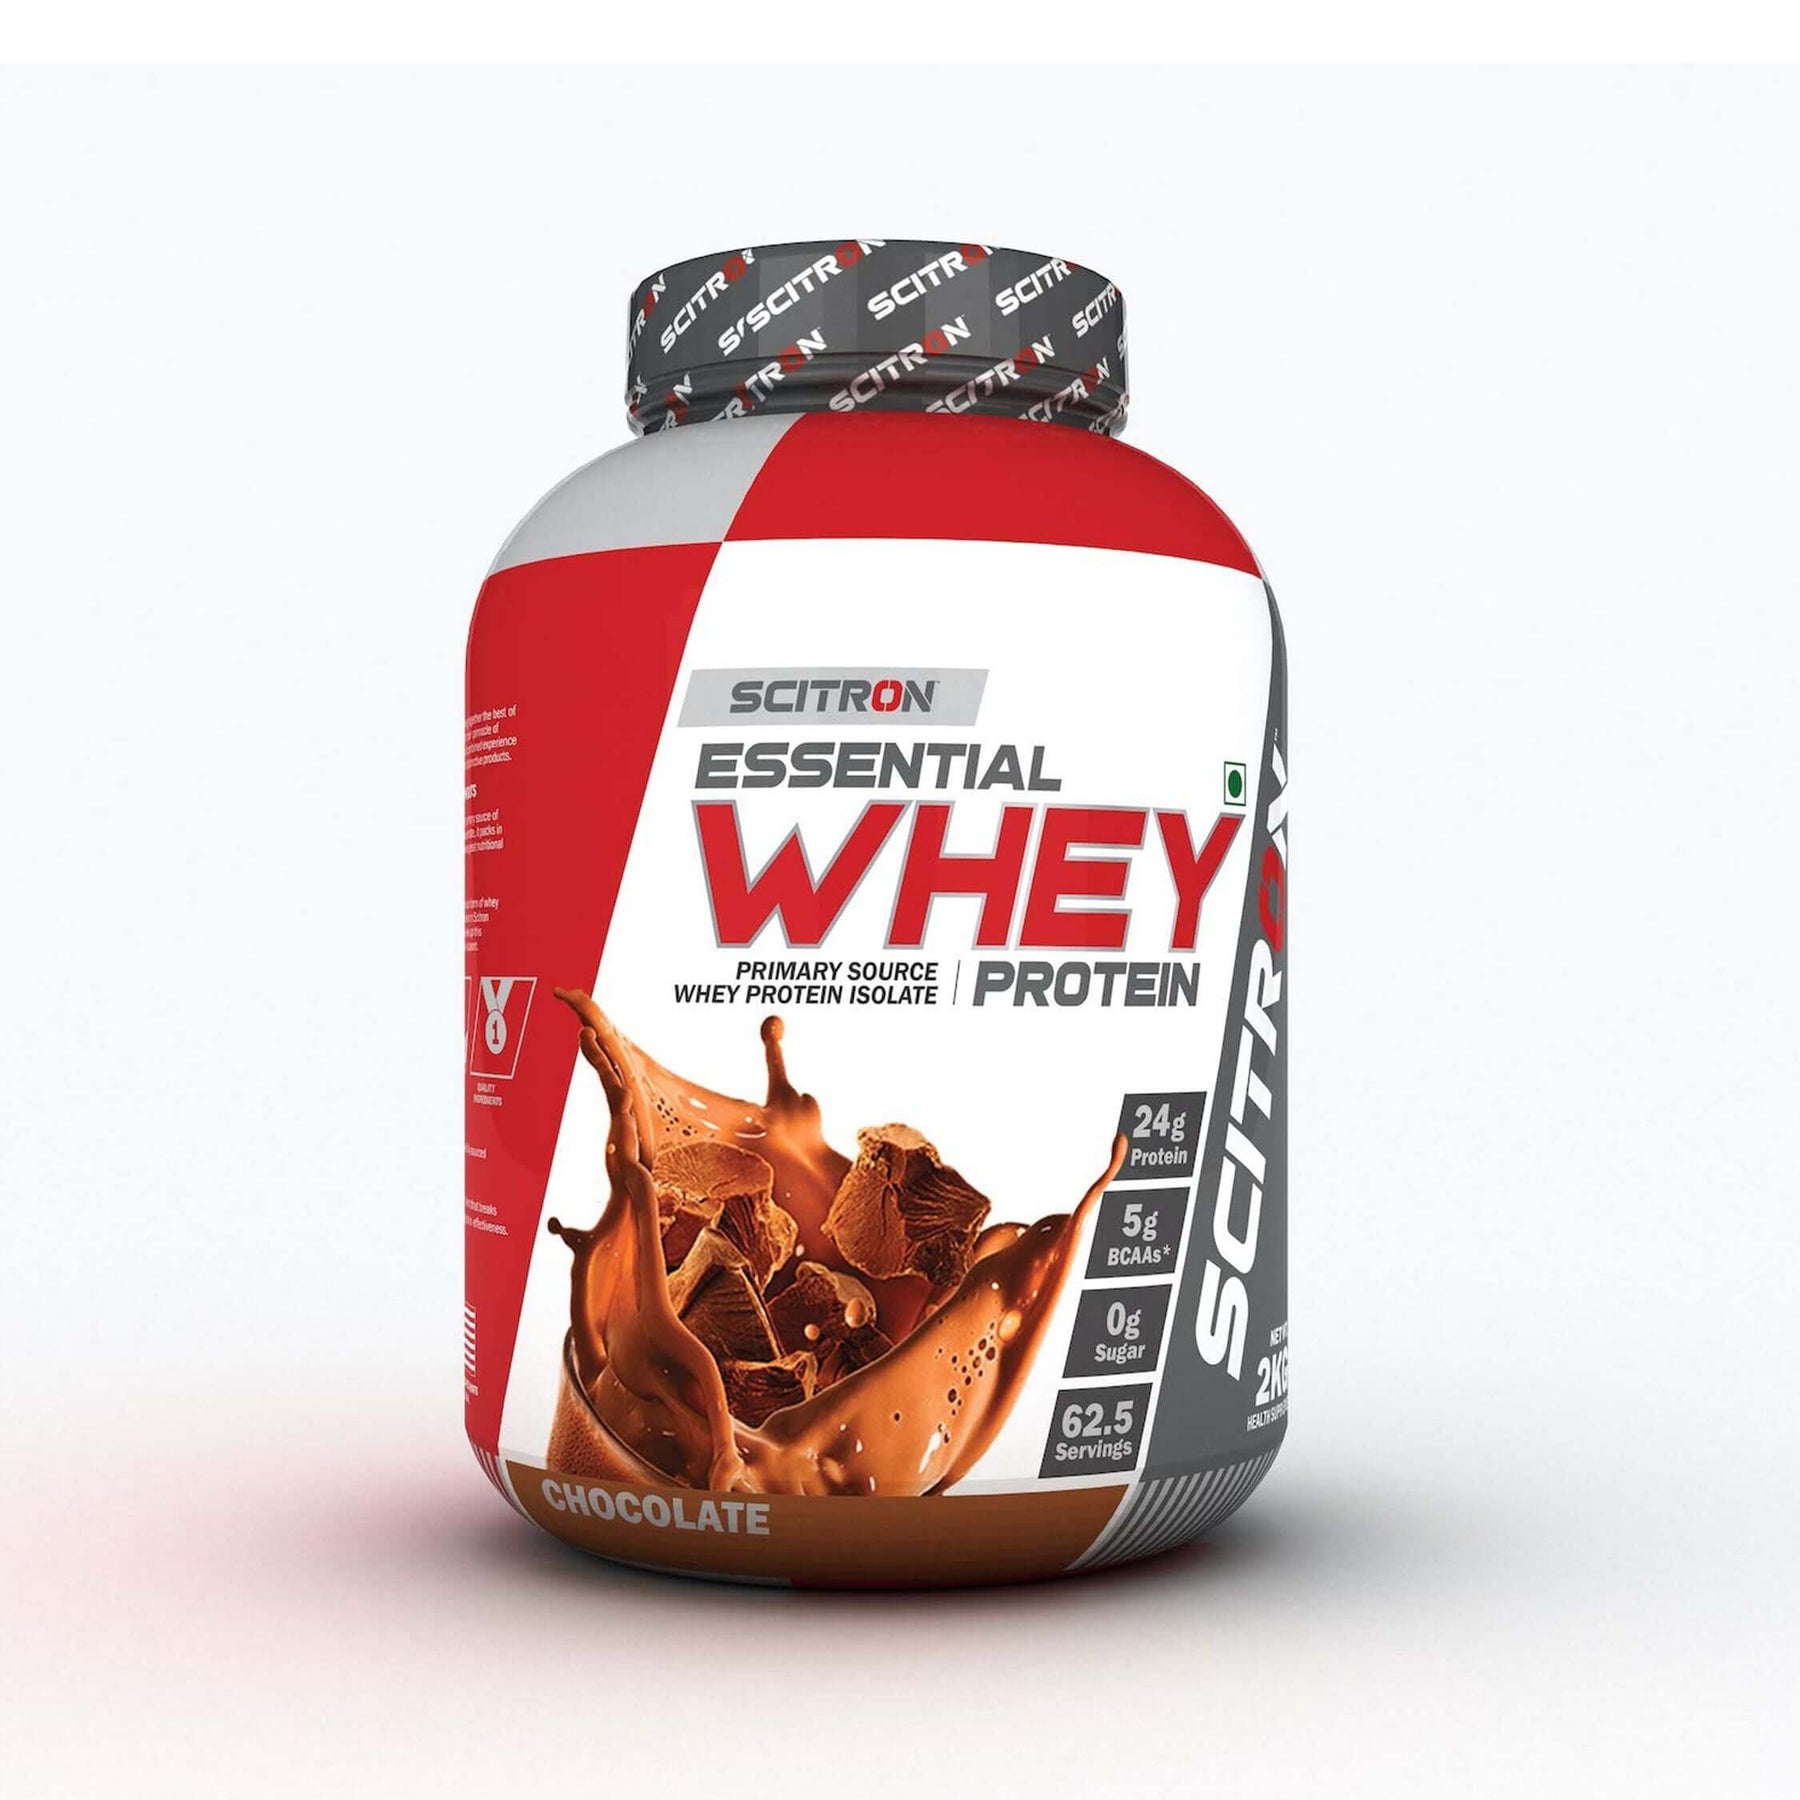 Scitron ESSENTIAL Whey Protein 2kg Chocolate